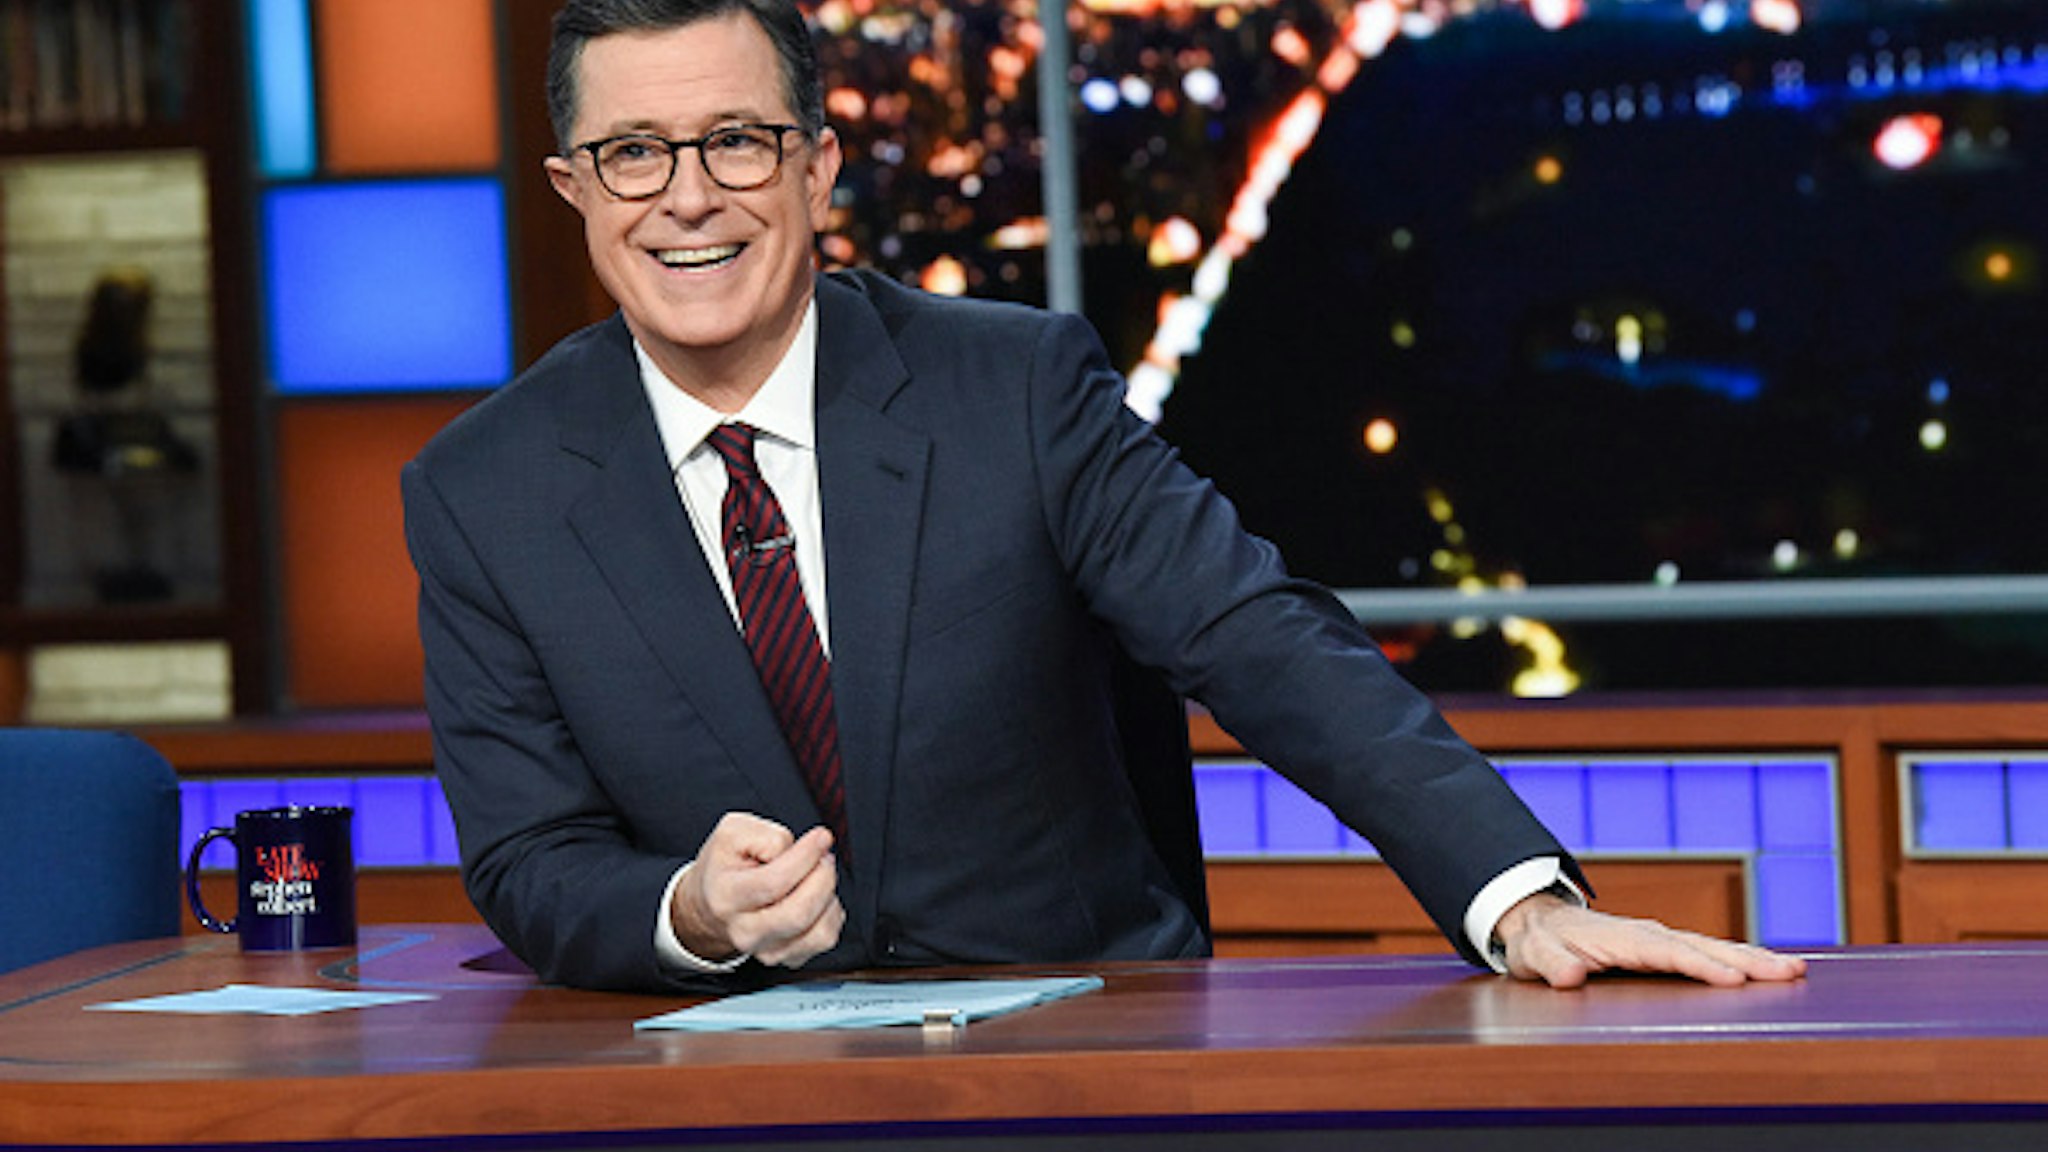 NEW YORK - NOVEMBER 18: The Late Show with Stephen Colbert during Monday's November 18, 2019 show.